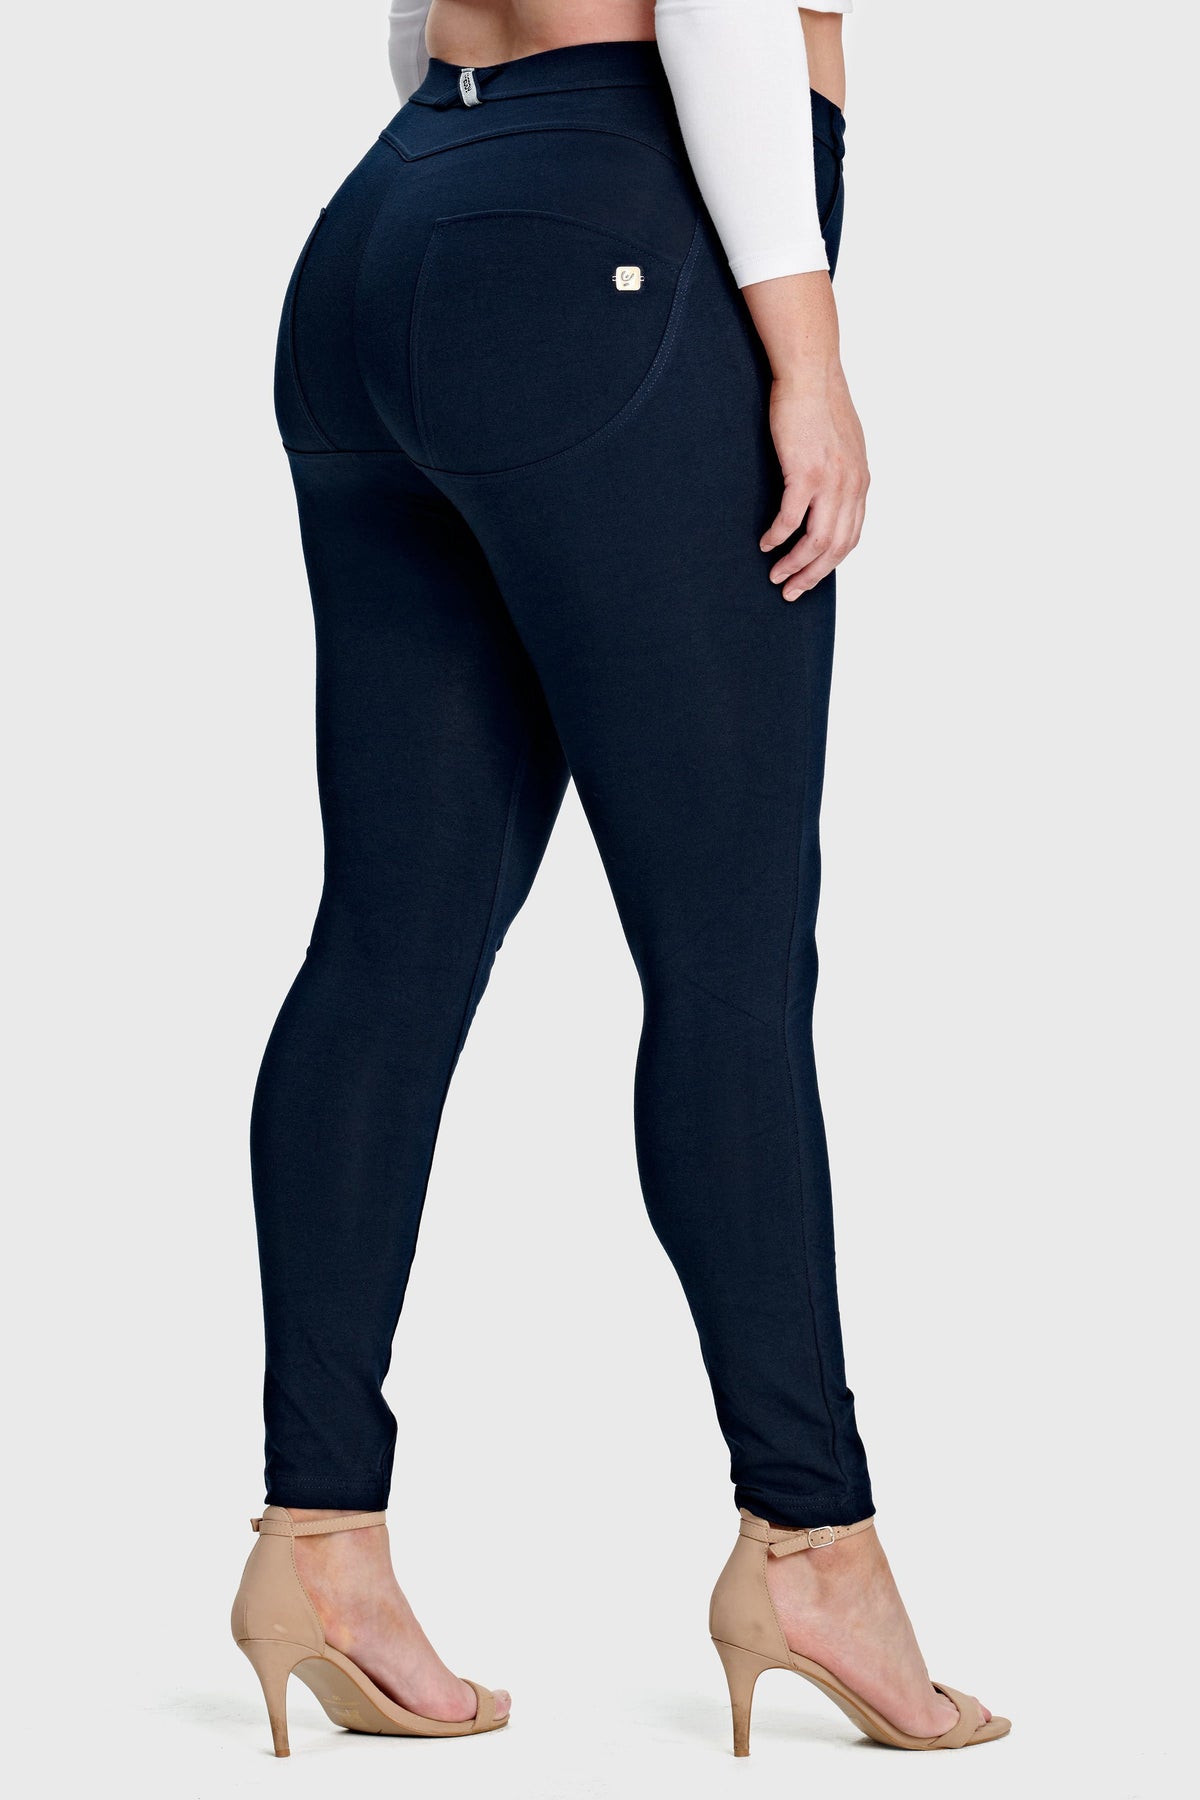 Navy Curvy Mid Rise Ankle Length